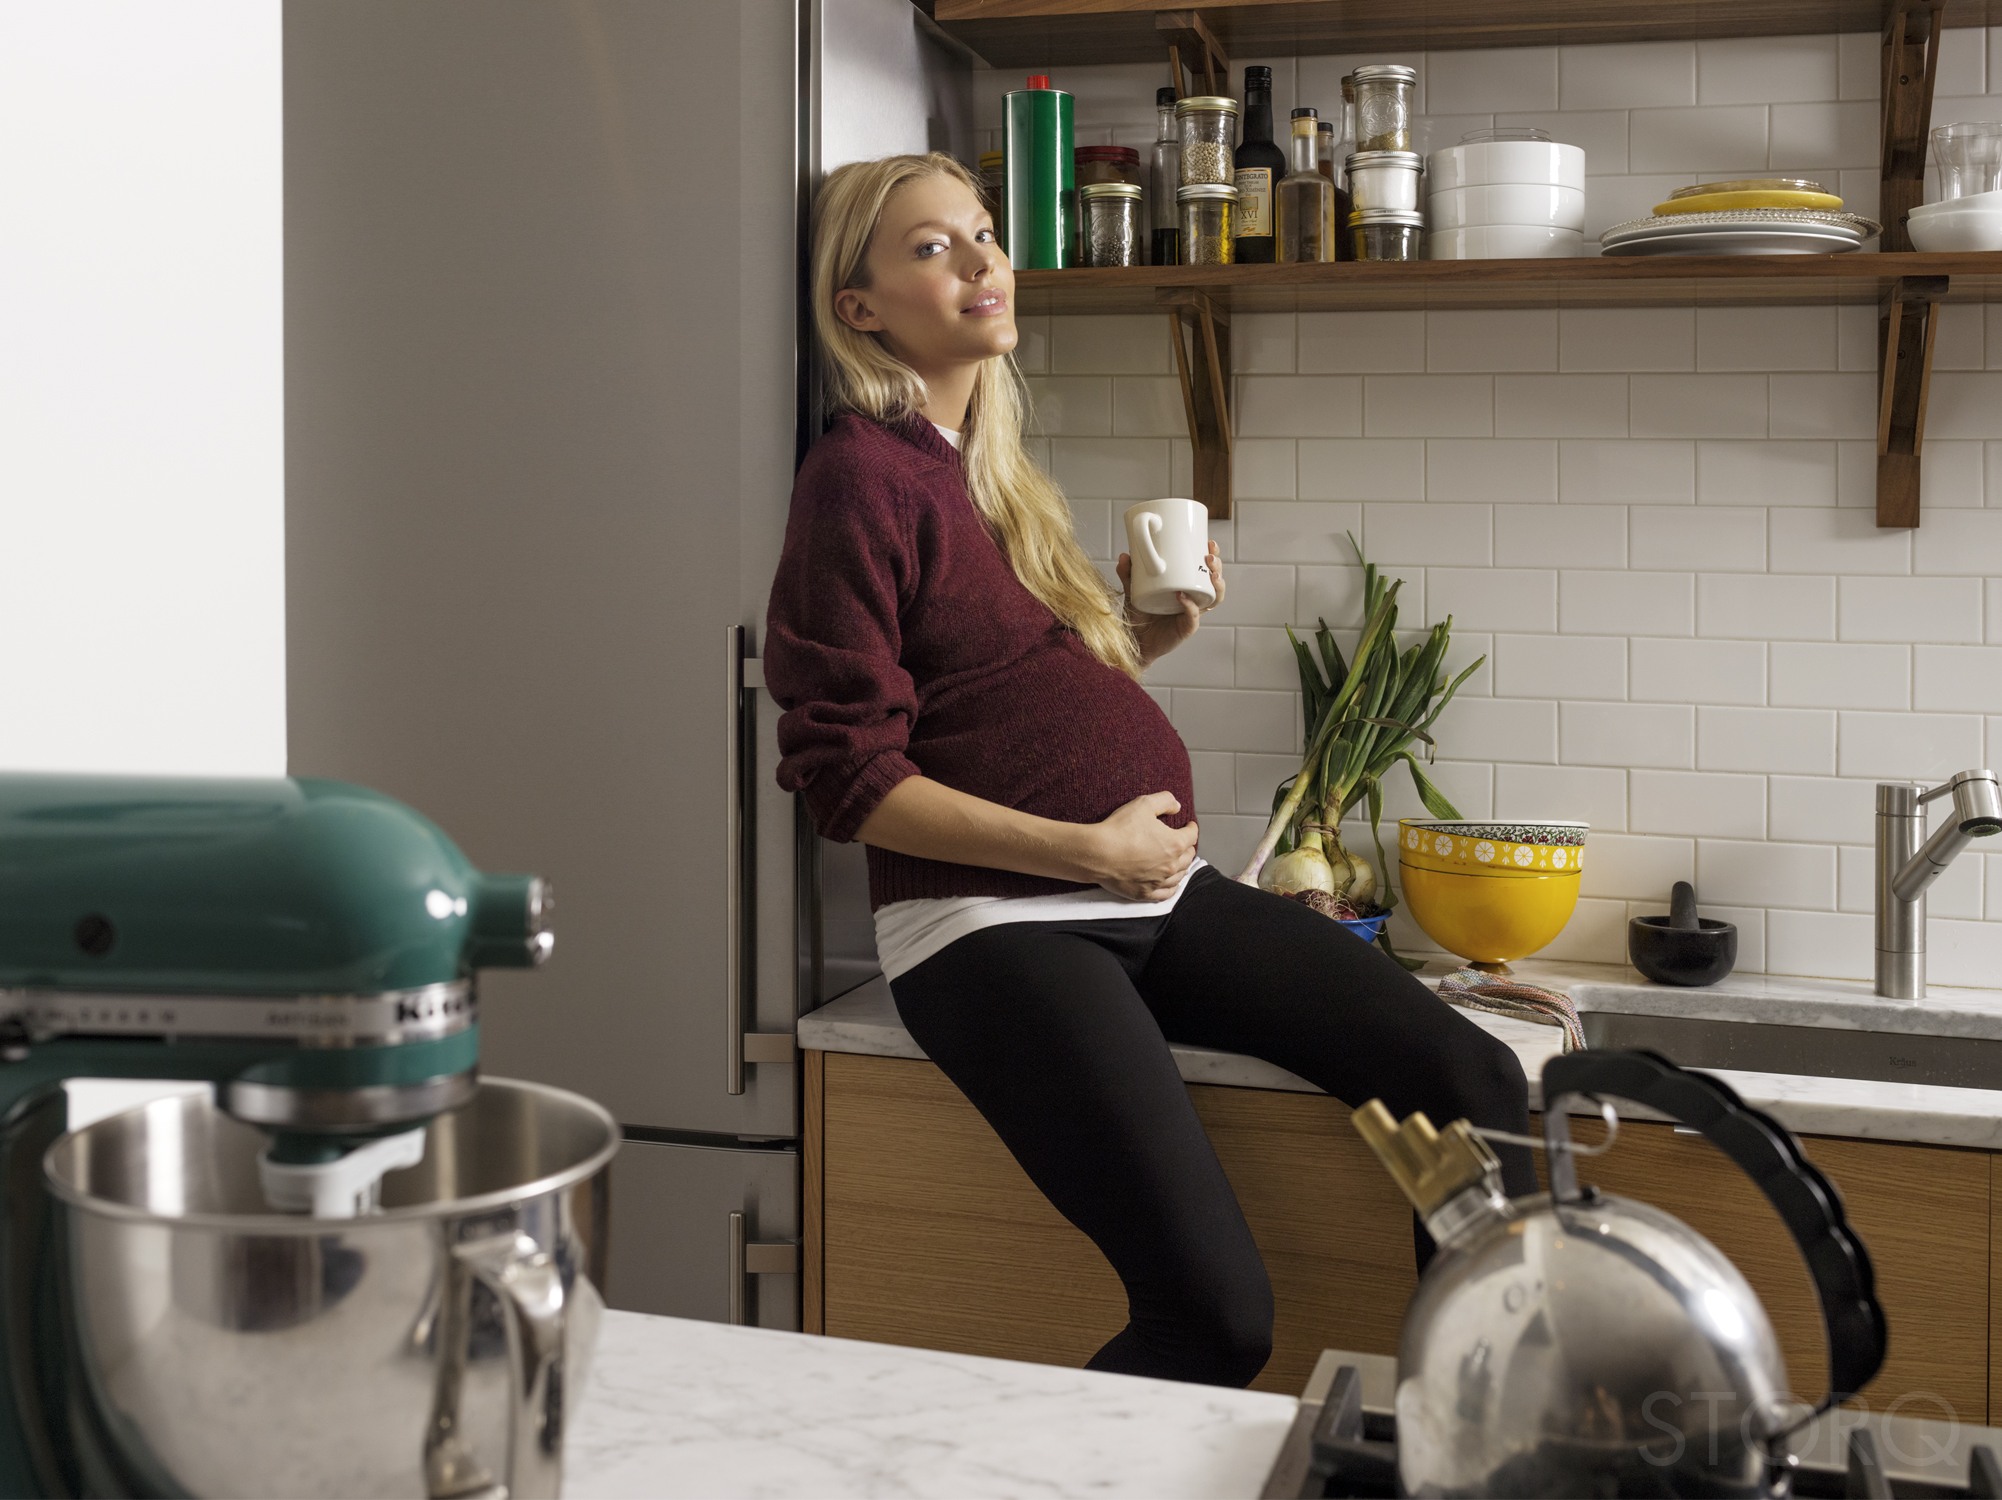 Storq: Stylish maternity basics just got way easier to find, wear, and match.